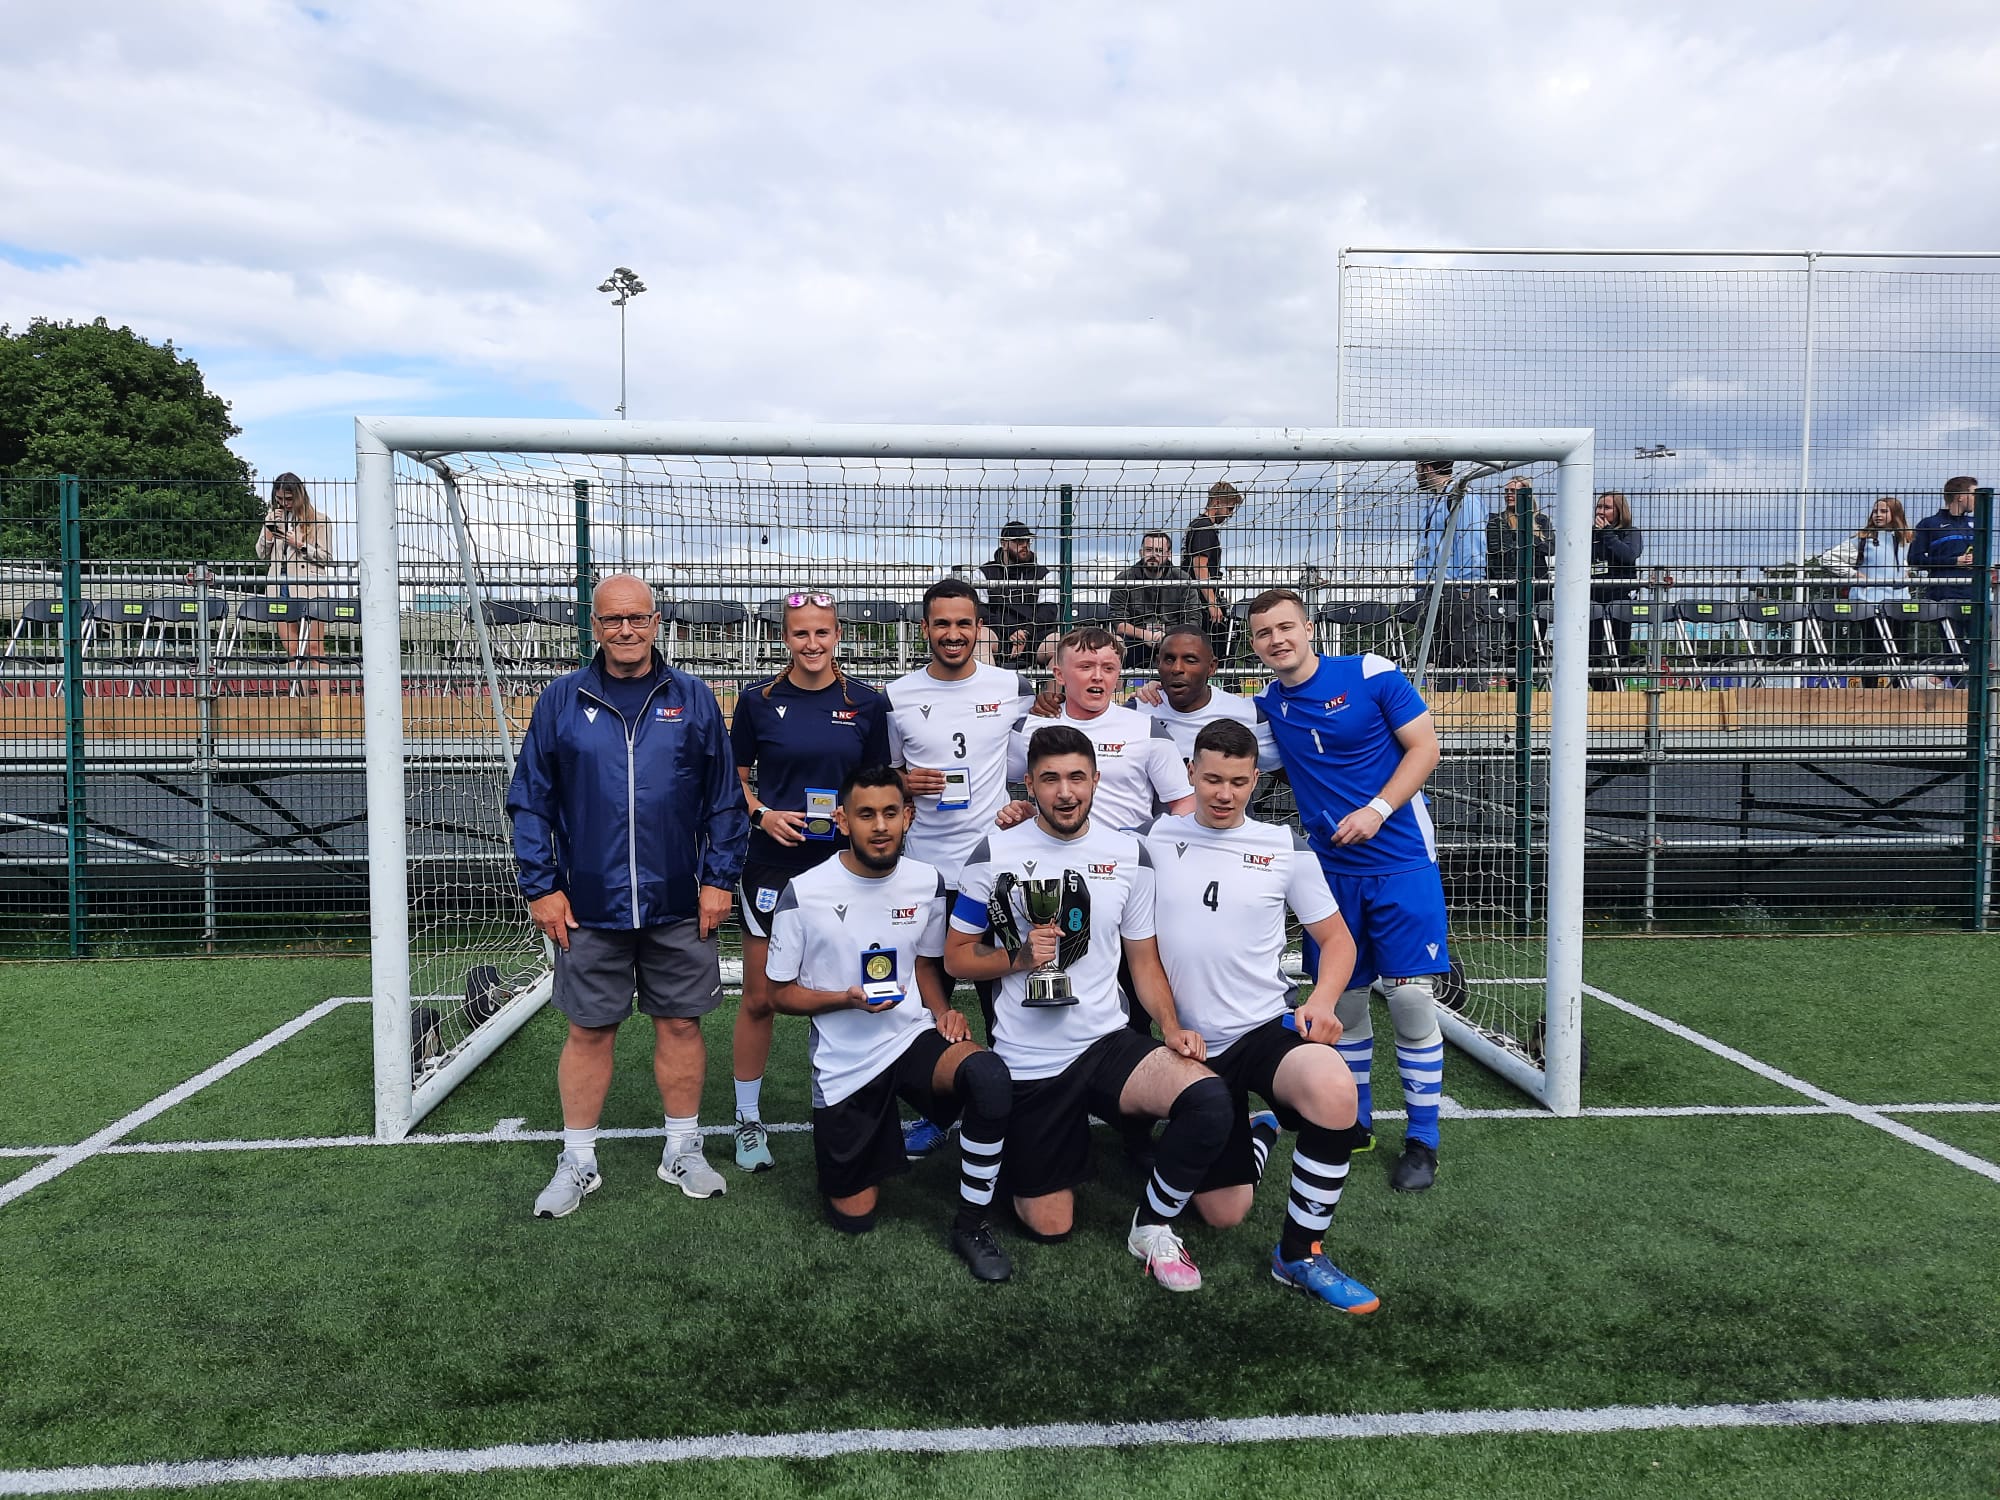 RNC wins FA Disability Cup for second year running